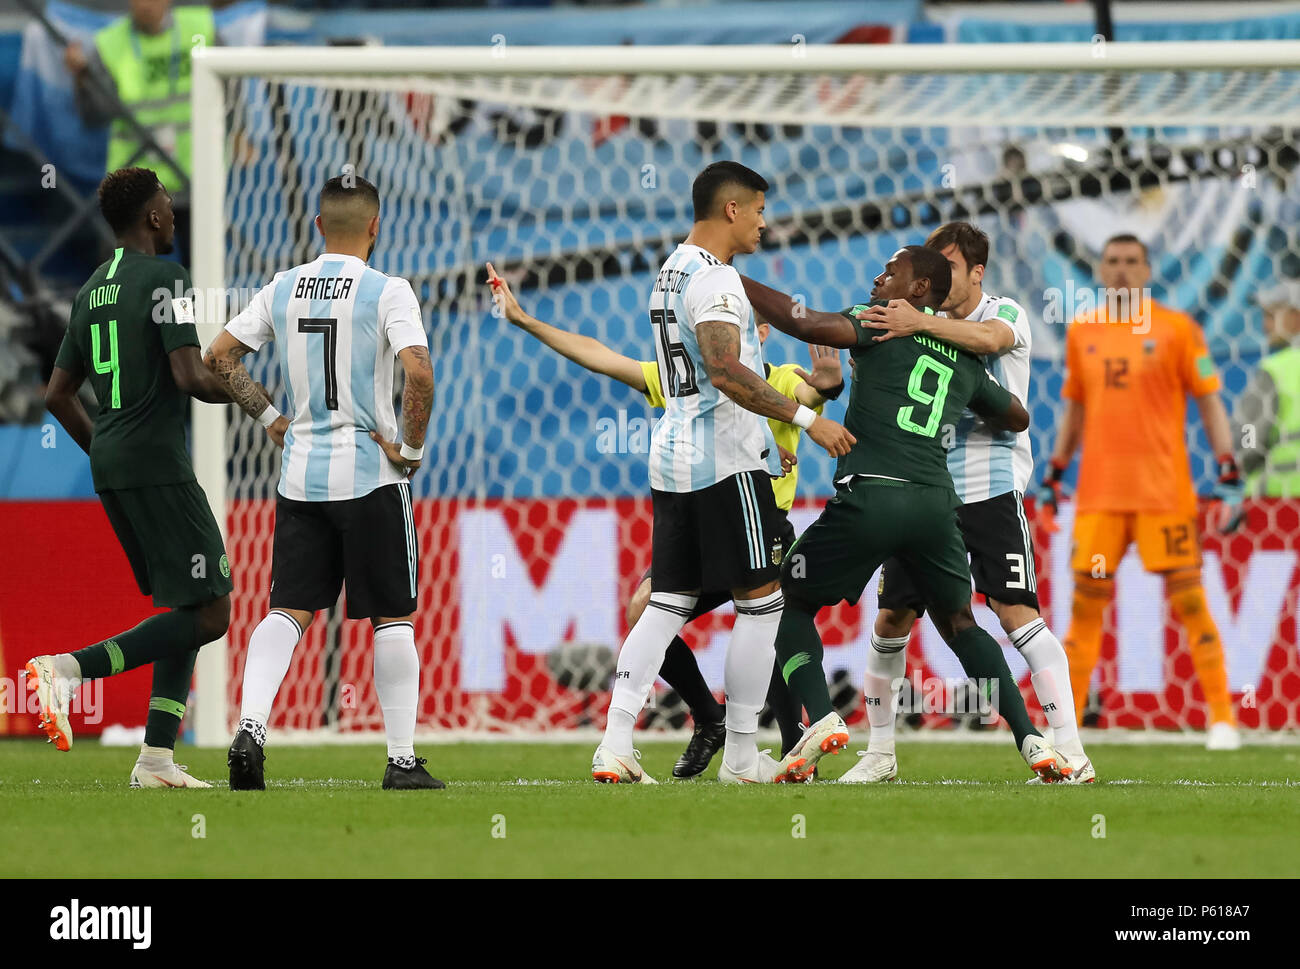 St Petersburg, Russia. 26th Jun, 2018. Marcos Rojo of Argentina and Odion Ighalo of Nigeria clash during the 2018 FIFA World Cup Group D match between Nigeria and Argentina at Saint Petersburg Stadium on June 26th 2018 in Saint Petersburg, Russia. (Photo by Daniel Chesterton/phcimages.com) Credit: PHC Images/Alamy Live News Stock Photo